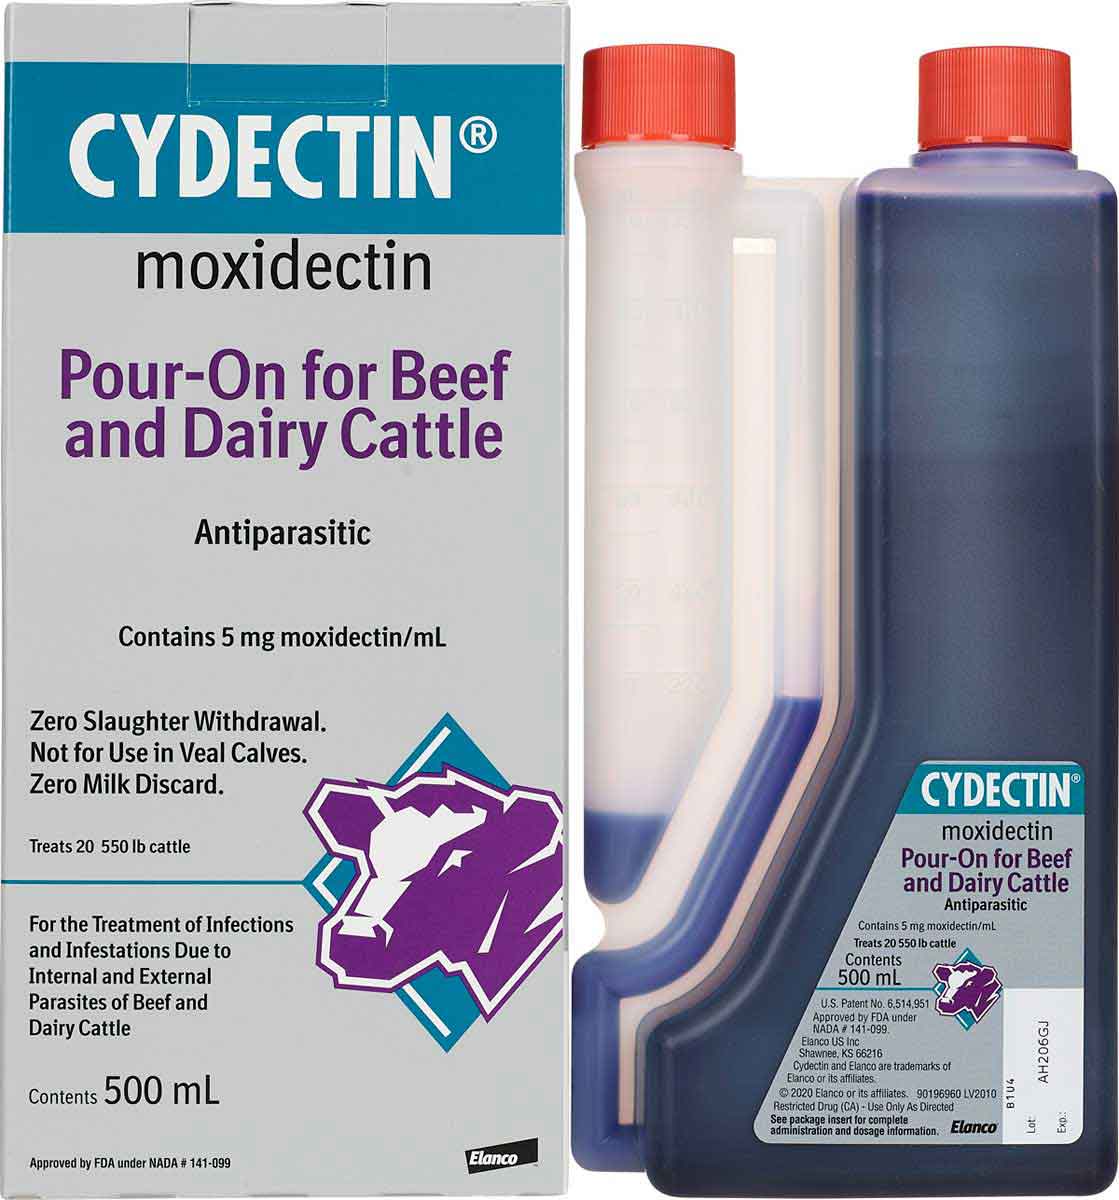 Cydectin Pour On For Beef Dairy Cattle 500 Ml dosage Chamber Item 22940